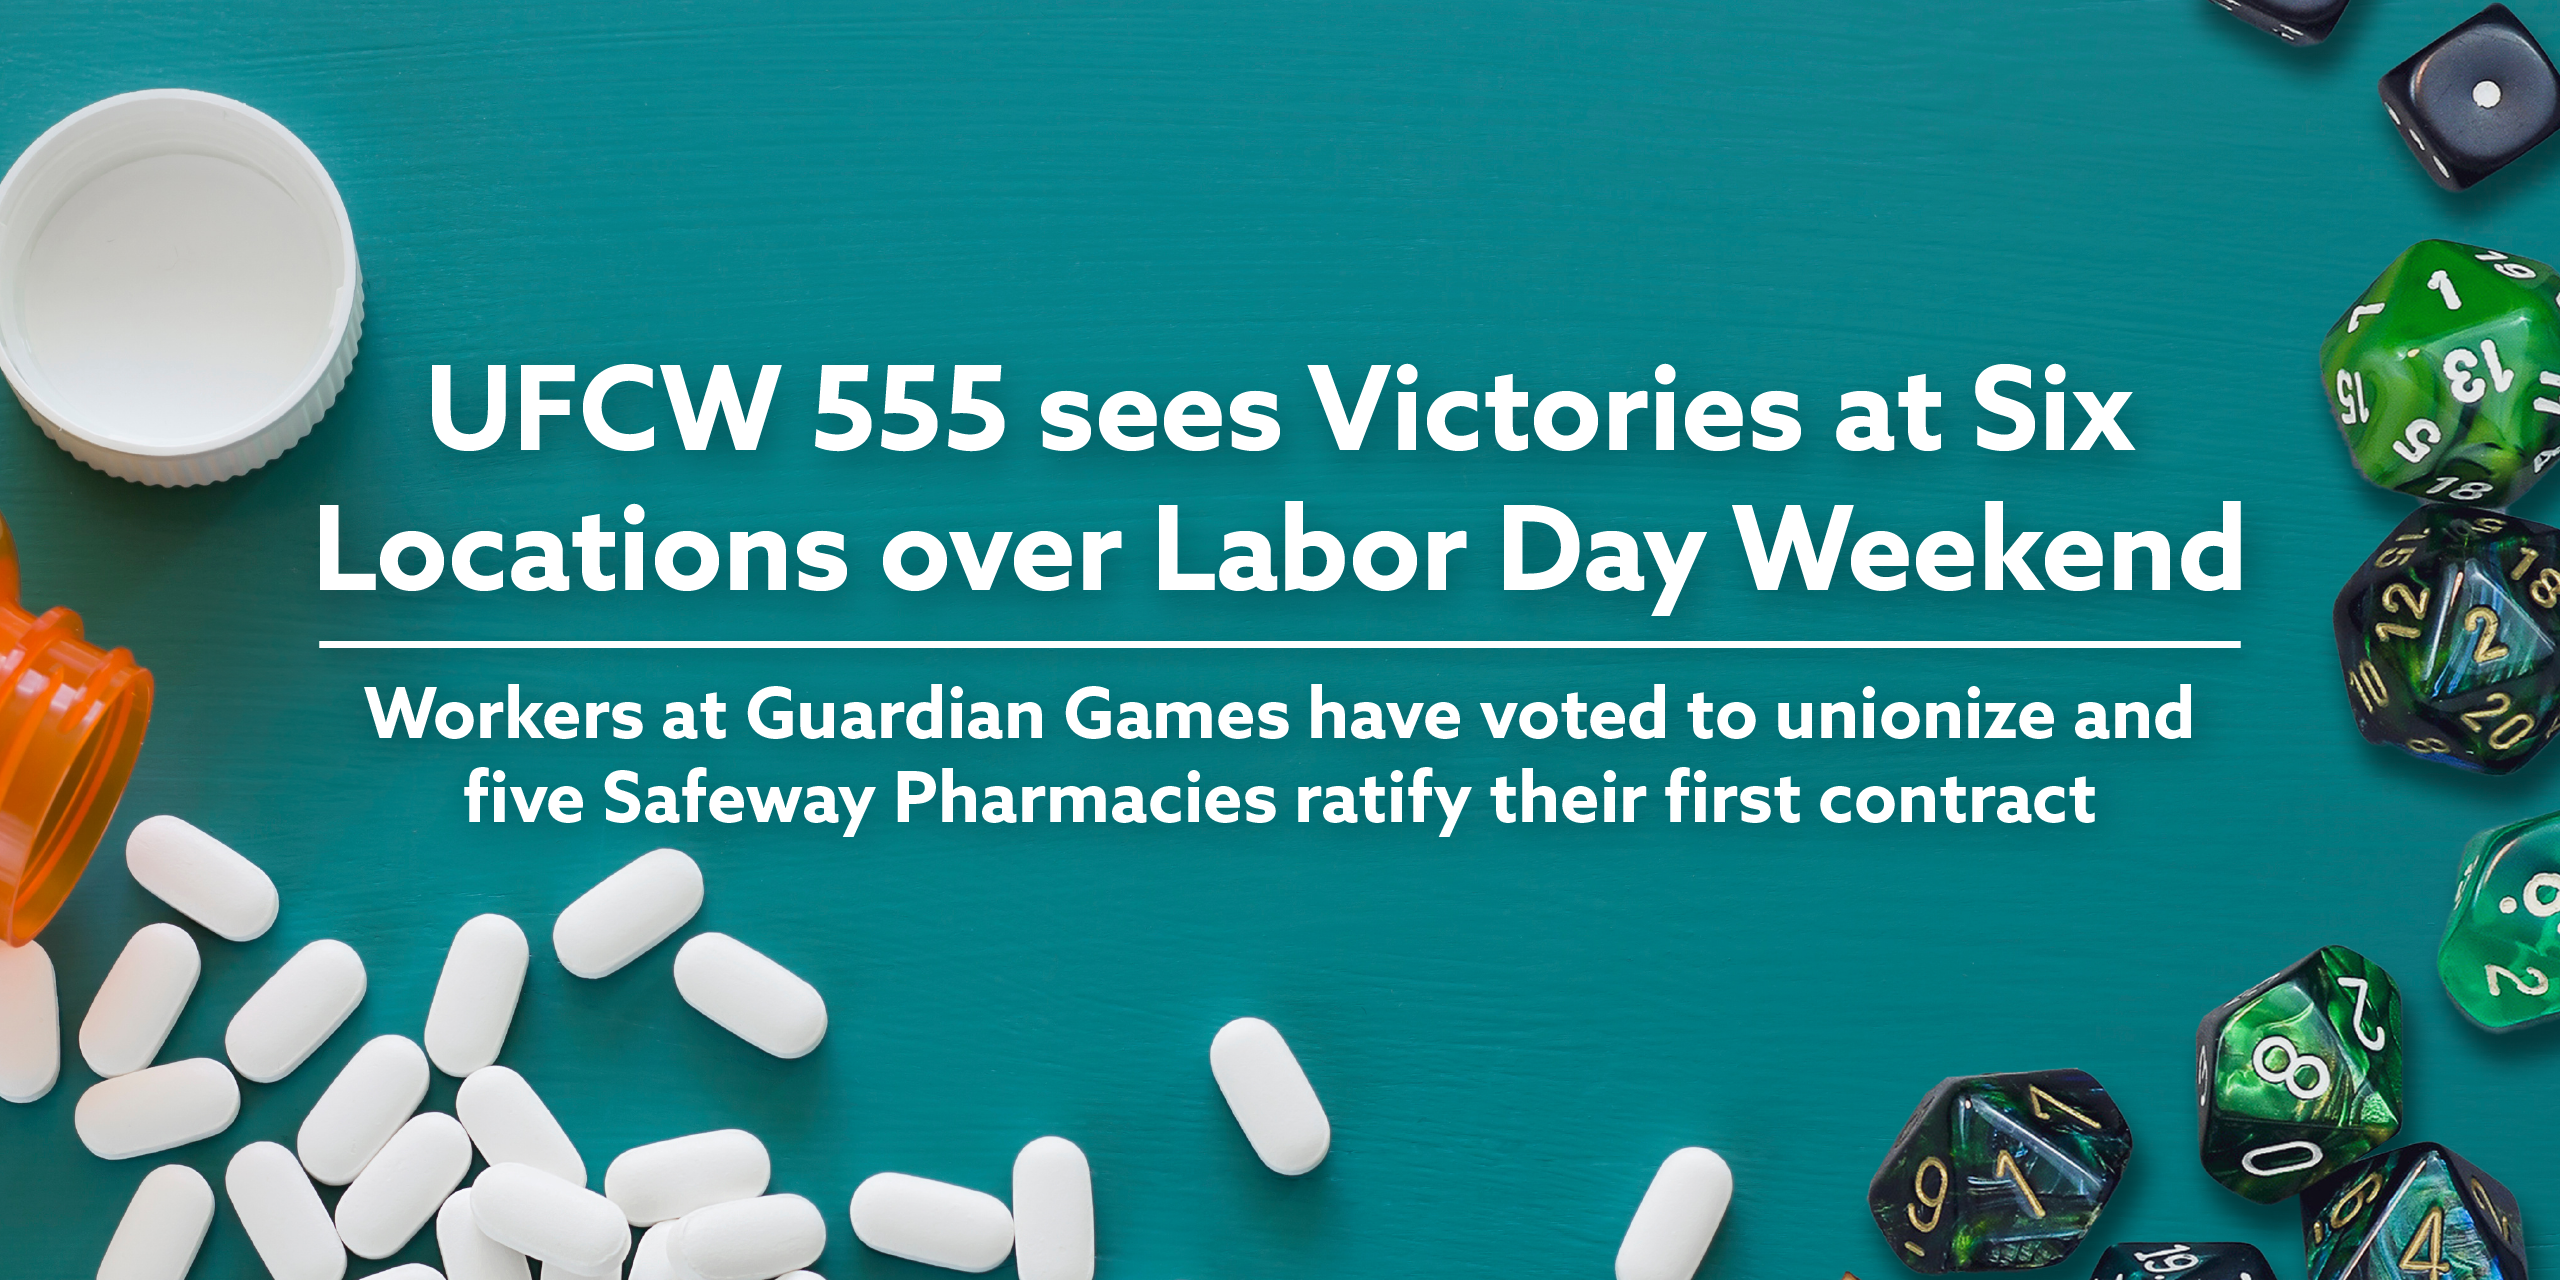 UFCW 555 sees Victories at Six Locations over Labor Day Weekend. Workers at Guardian Games have voted to unionize and five Safeway Pharmacies ratify their first contract.